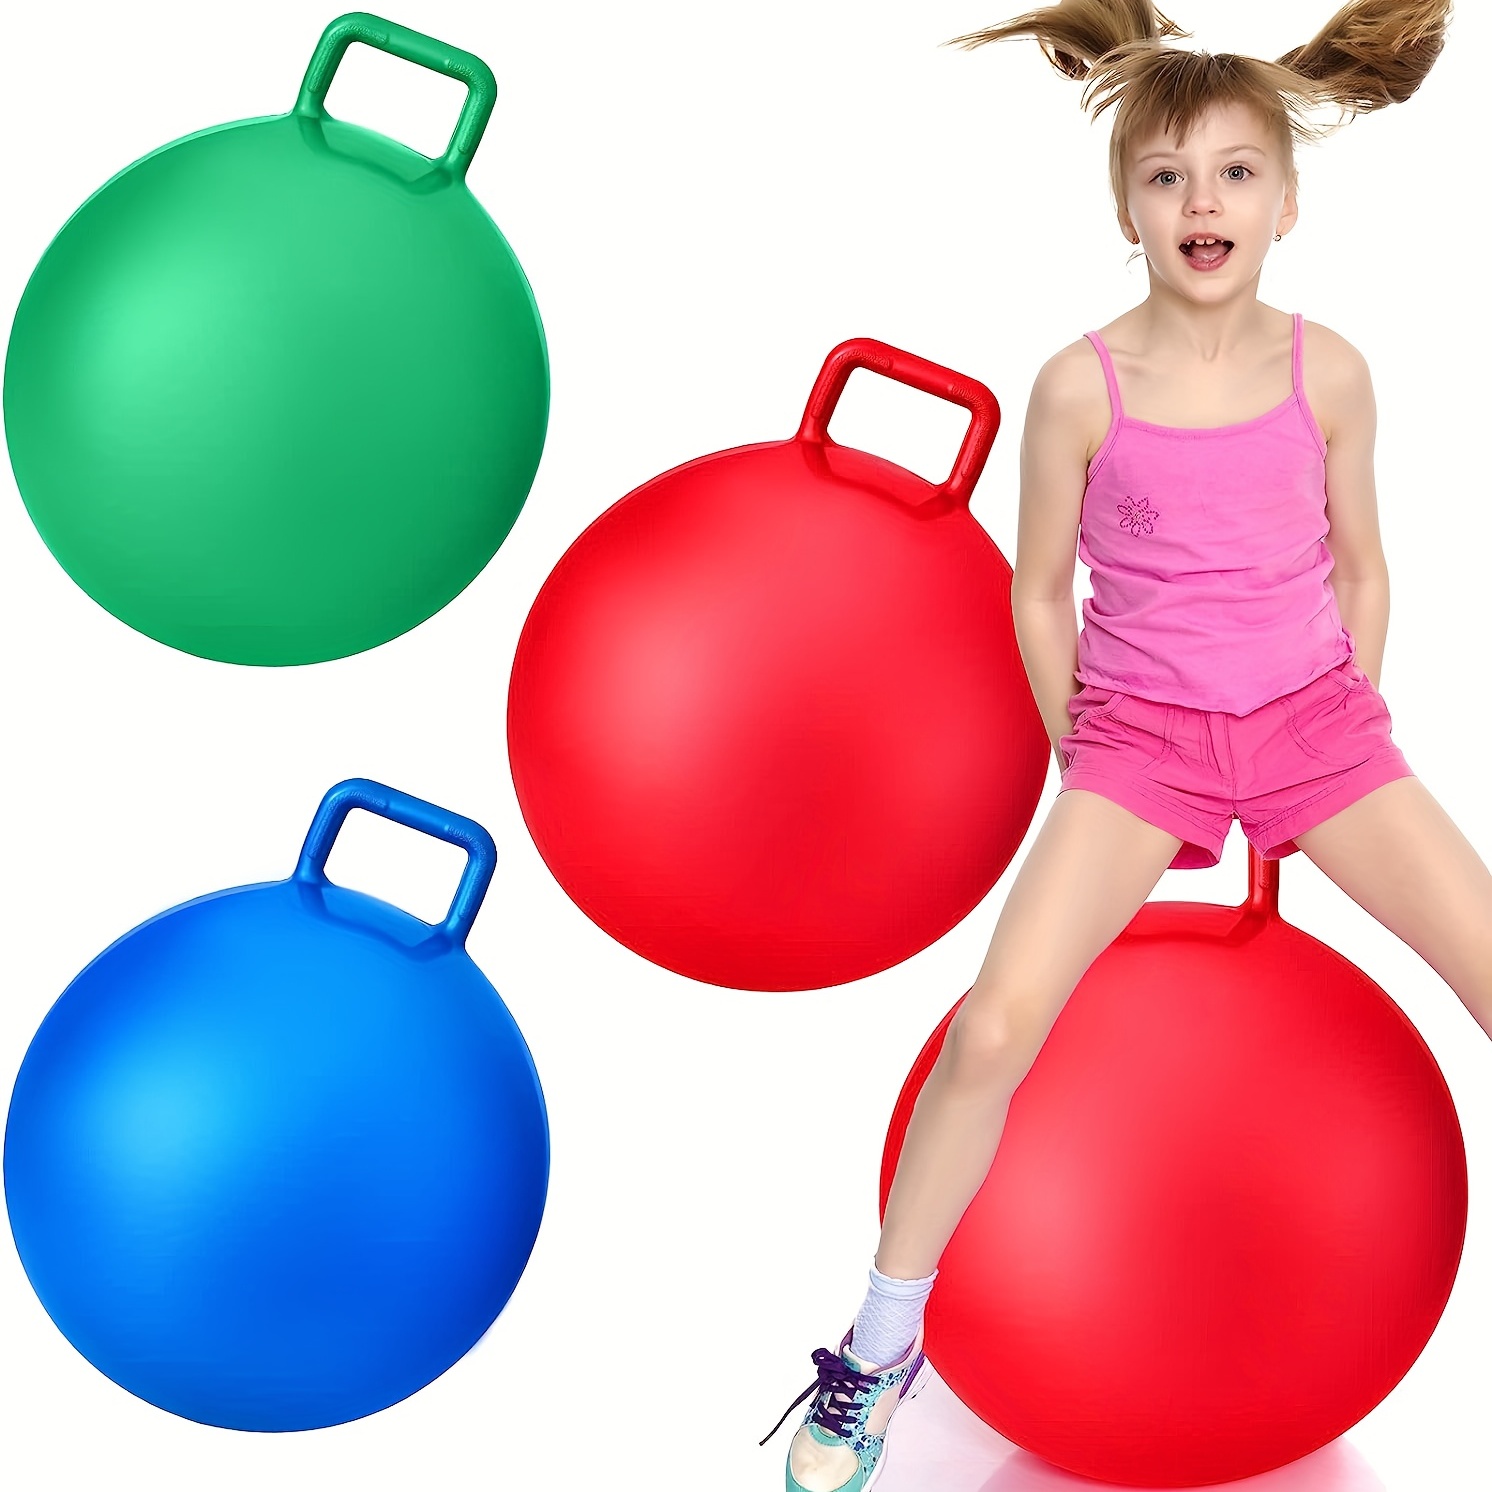 

Hopper Ball Large Jumping Hopping Ball, 18 Inch Exercise Ball Bouncing Ball With Handle For Outdoors Sports School Games Exercise (color And Pattern Random ) Halloween Christmas Gift